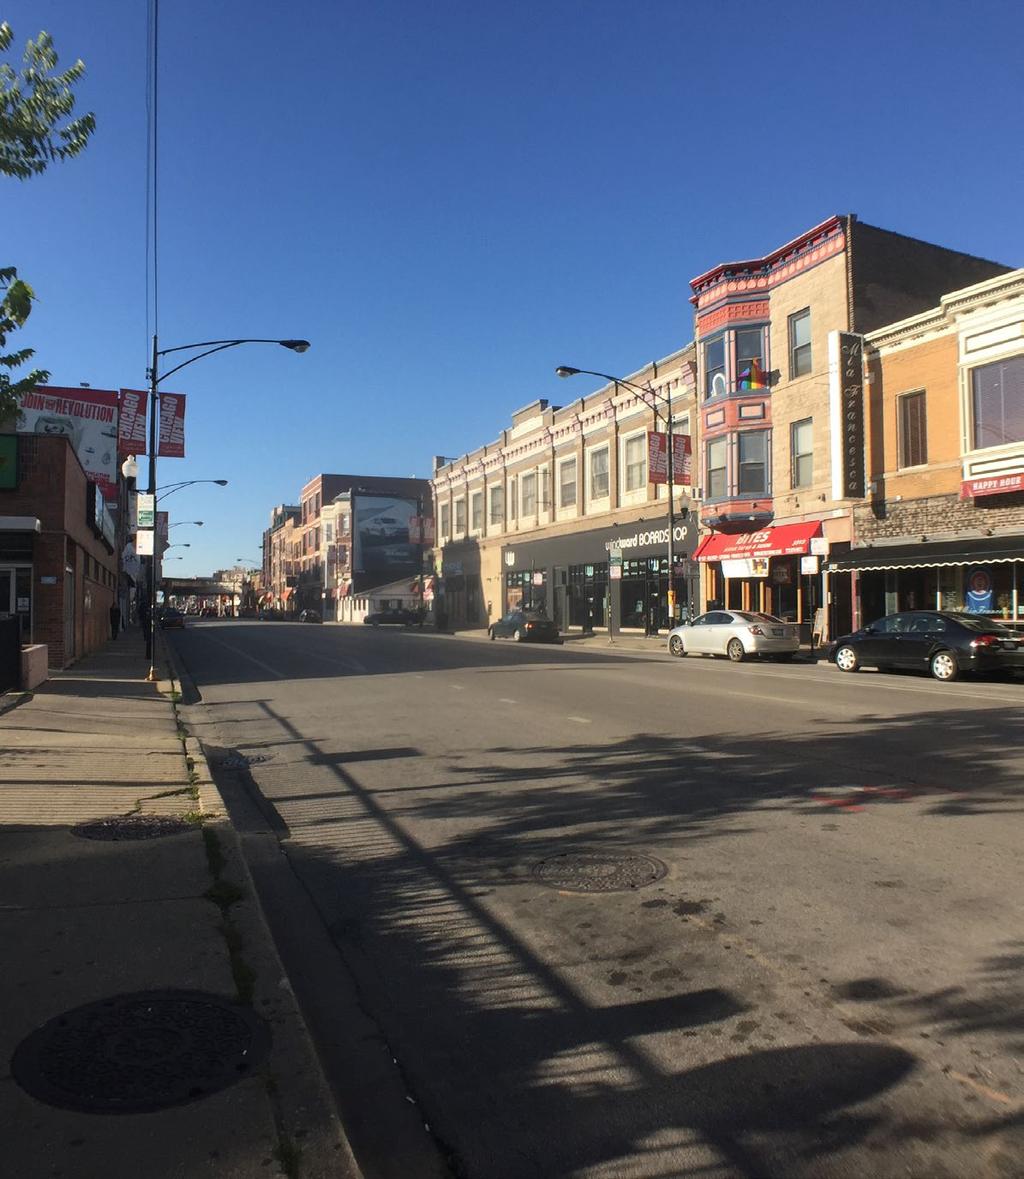 CLARK STREET PRINCIPLES 1. Promote neighborhood shopping street with a mix of independent and national retailers 2.